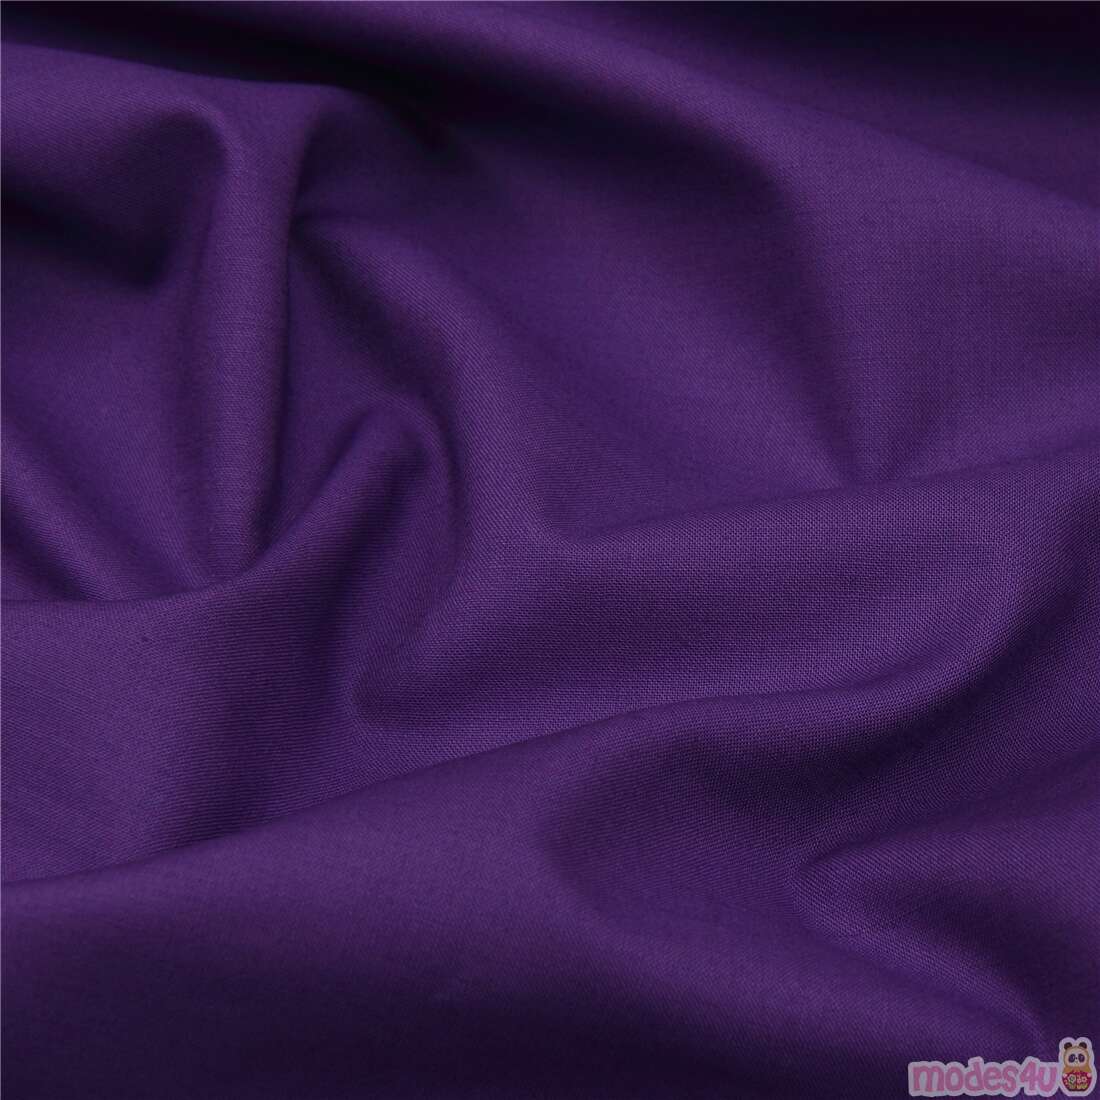 solid dark brown fabric by Cosmo Fabric by Cosmo - modeS4u